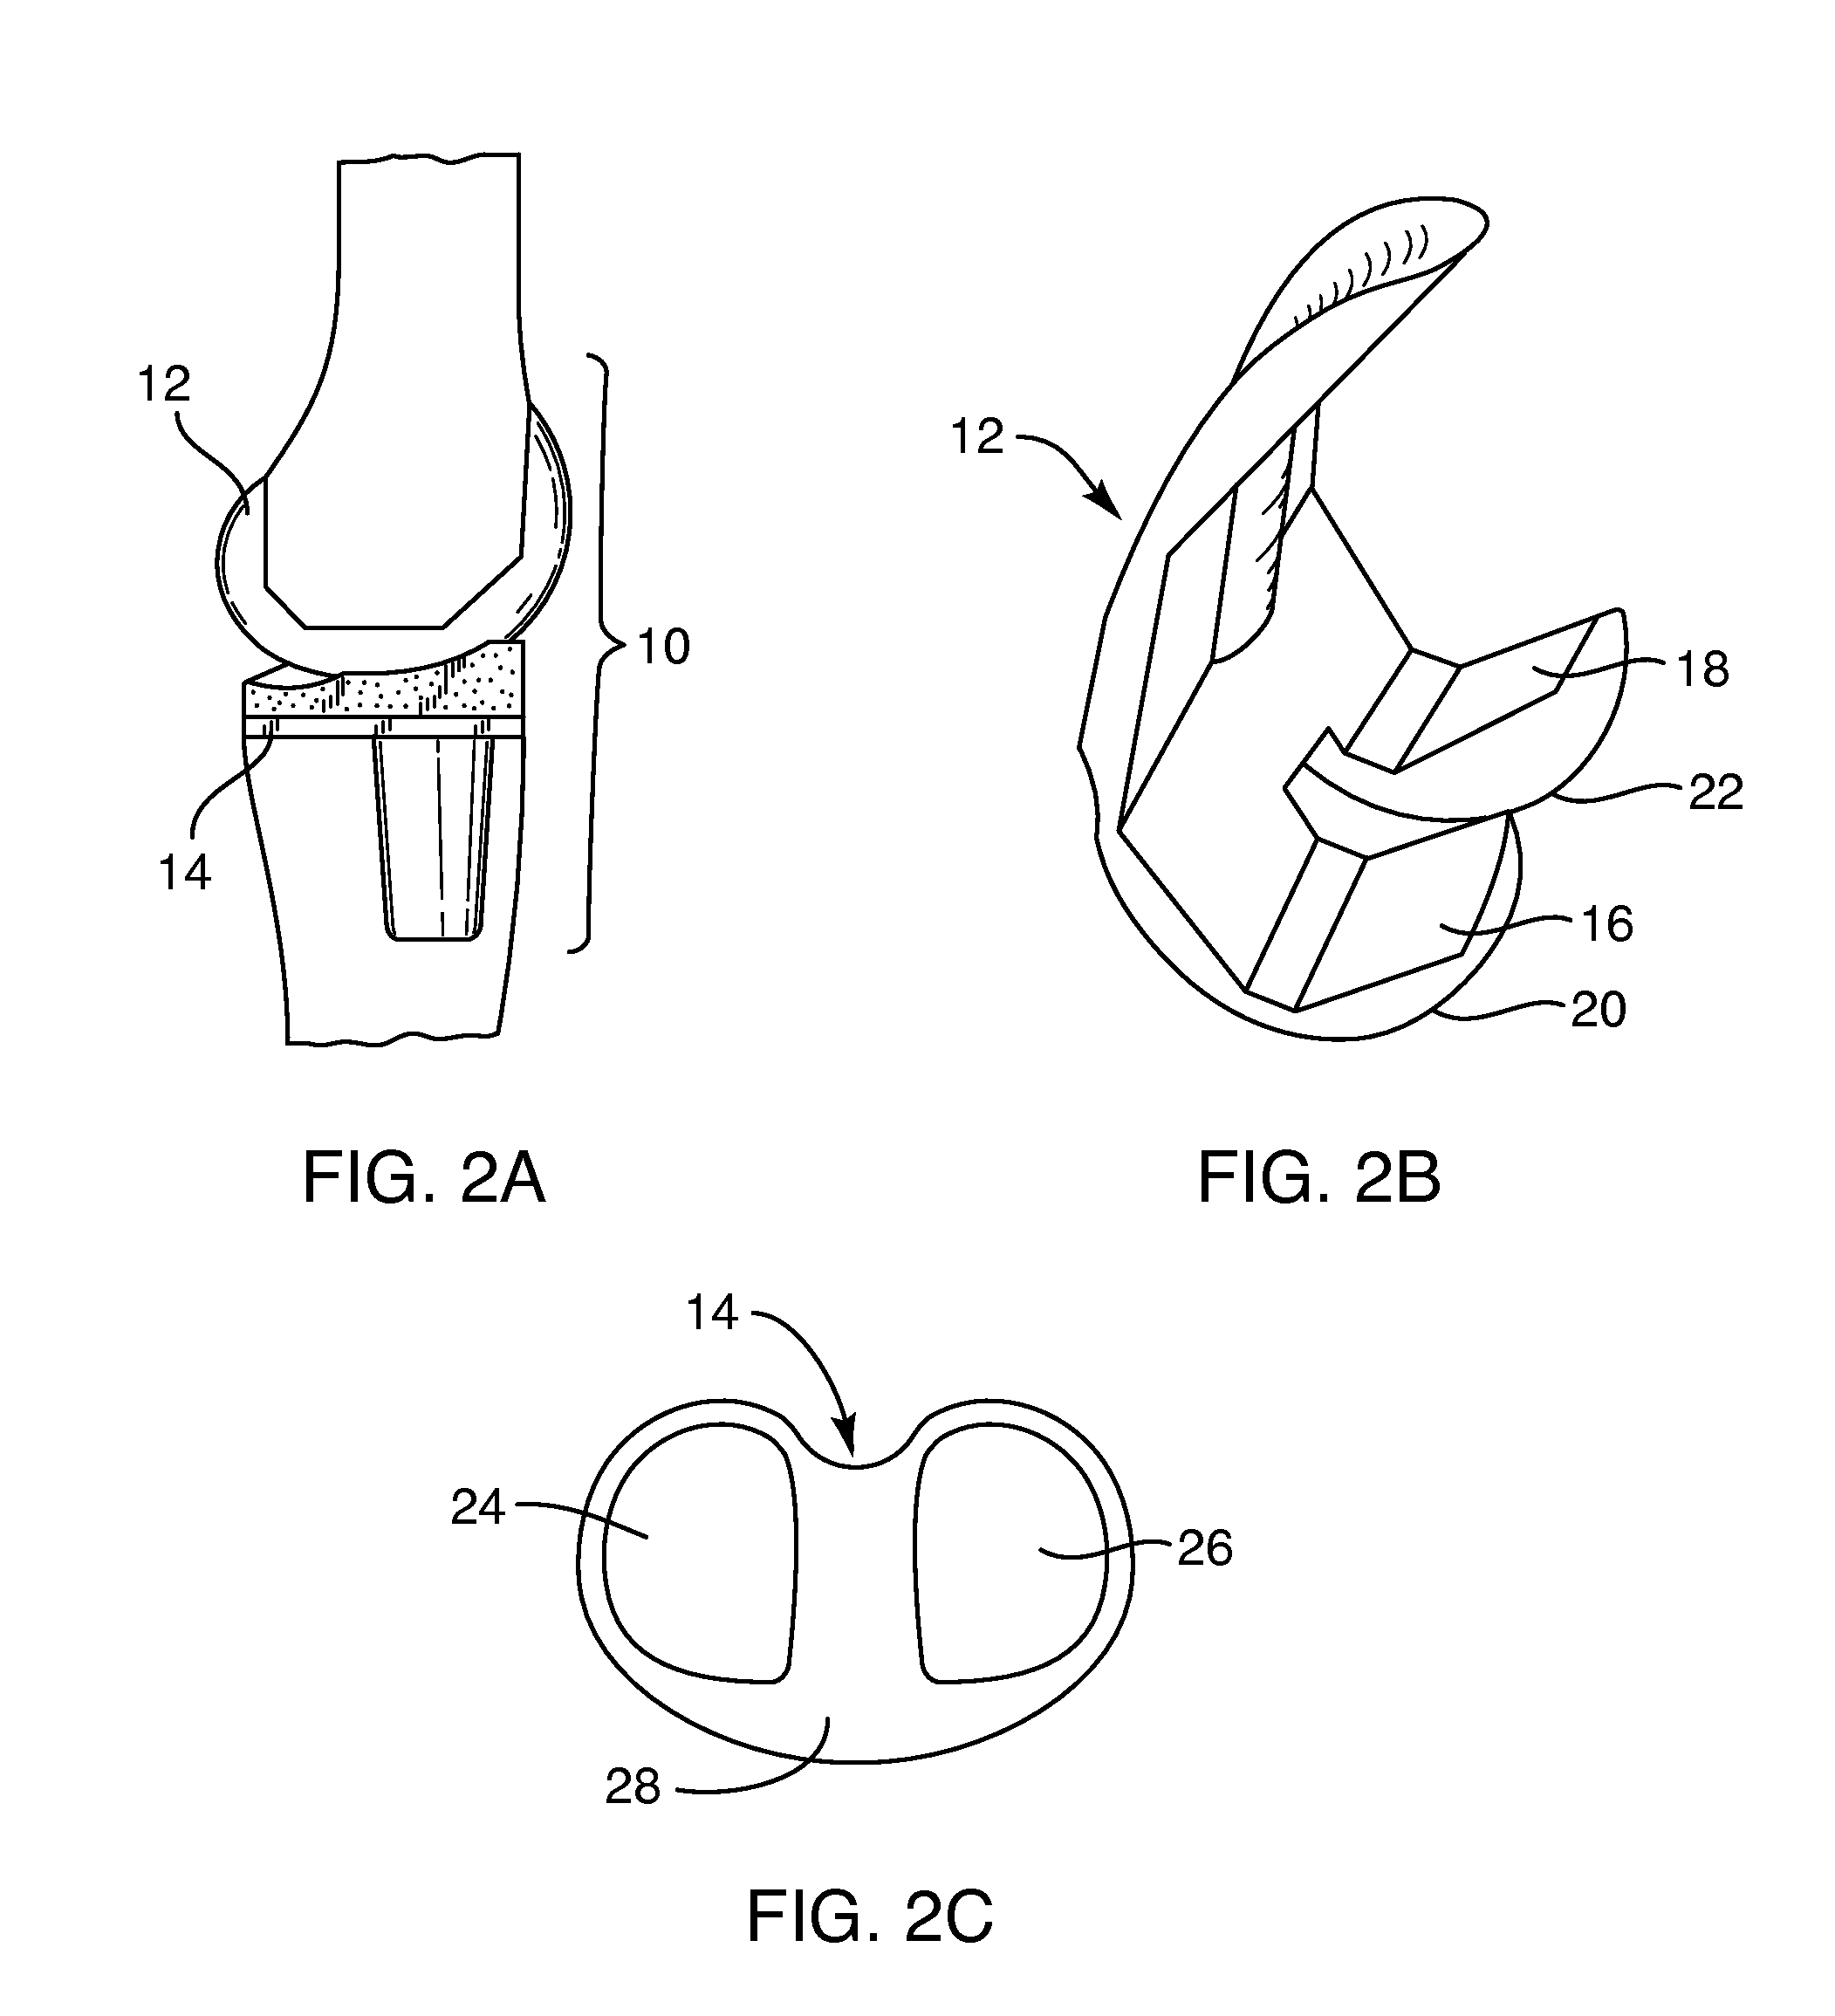 Systems and methods for providing an asymmetrical femoral component